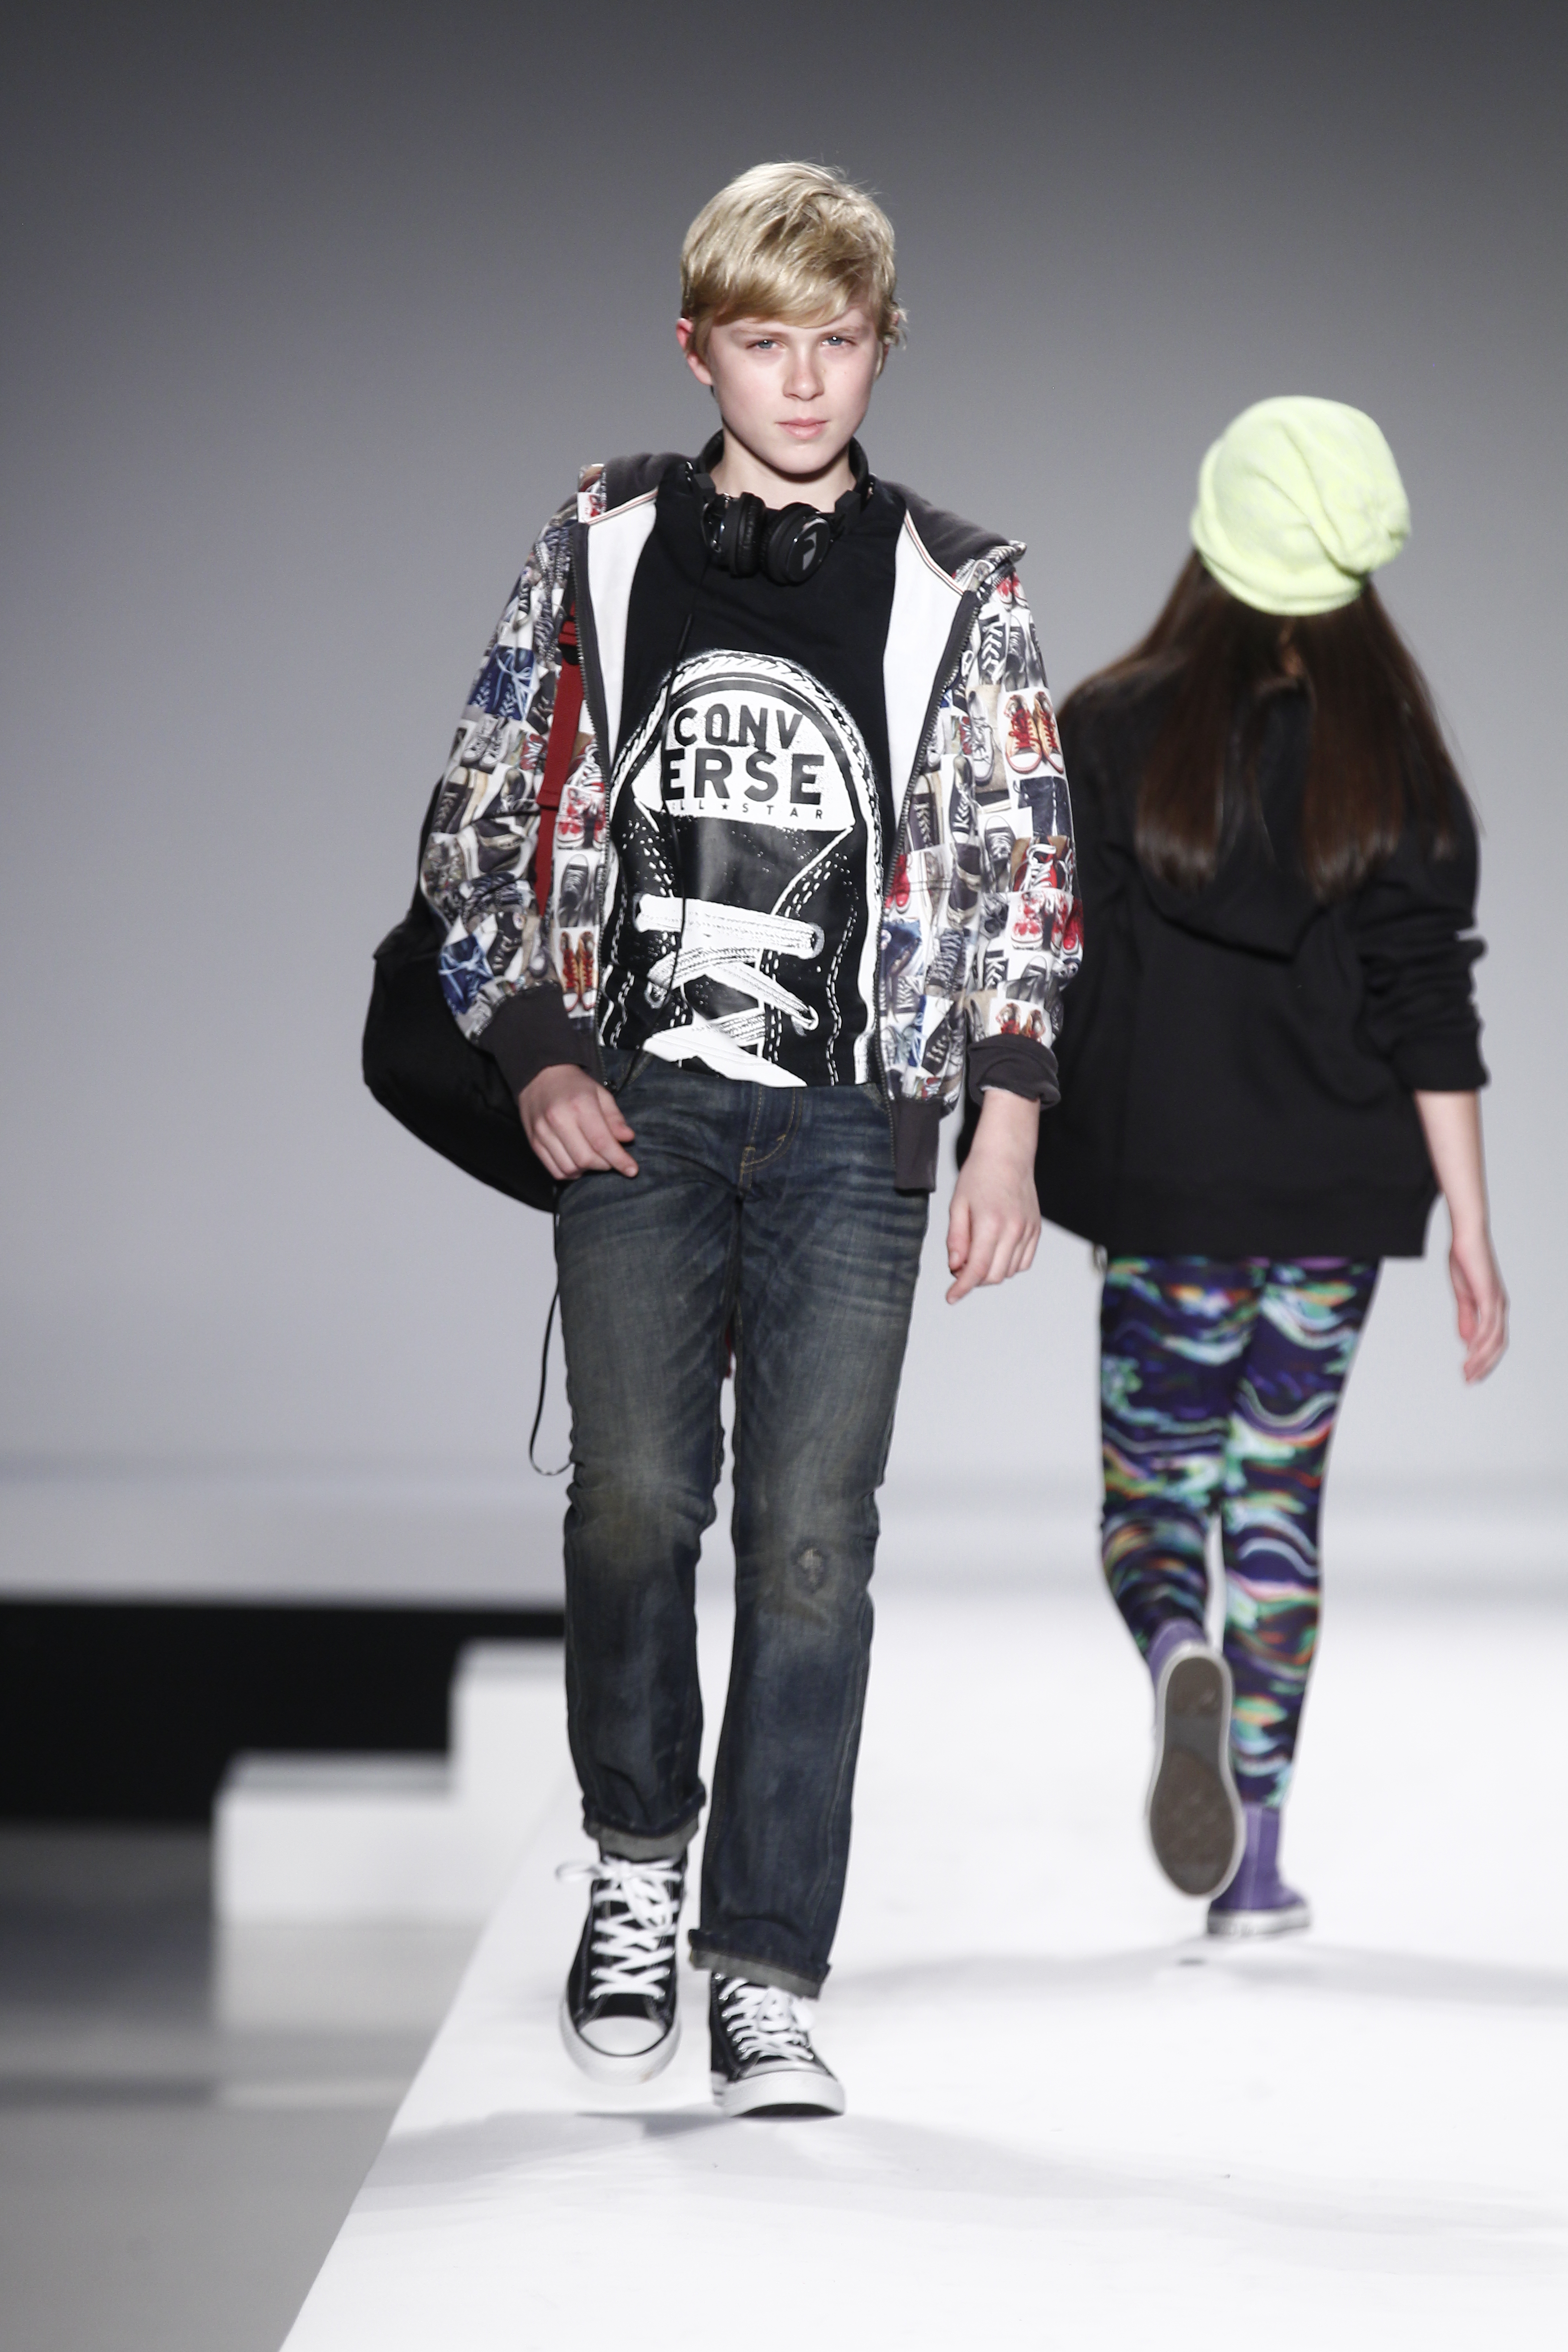 Kids Rock Nike-Levis Mercedes Benz Fashion show, Lincoln Center NYC 2015